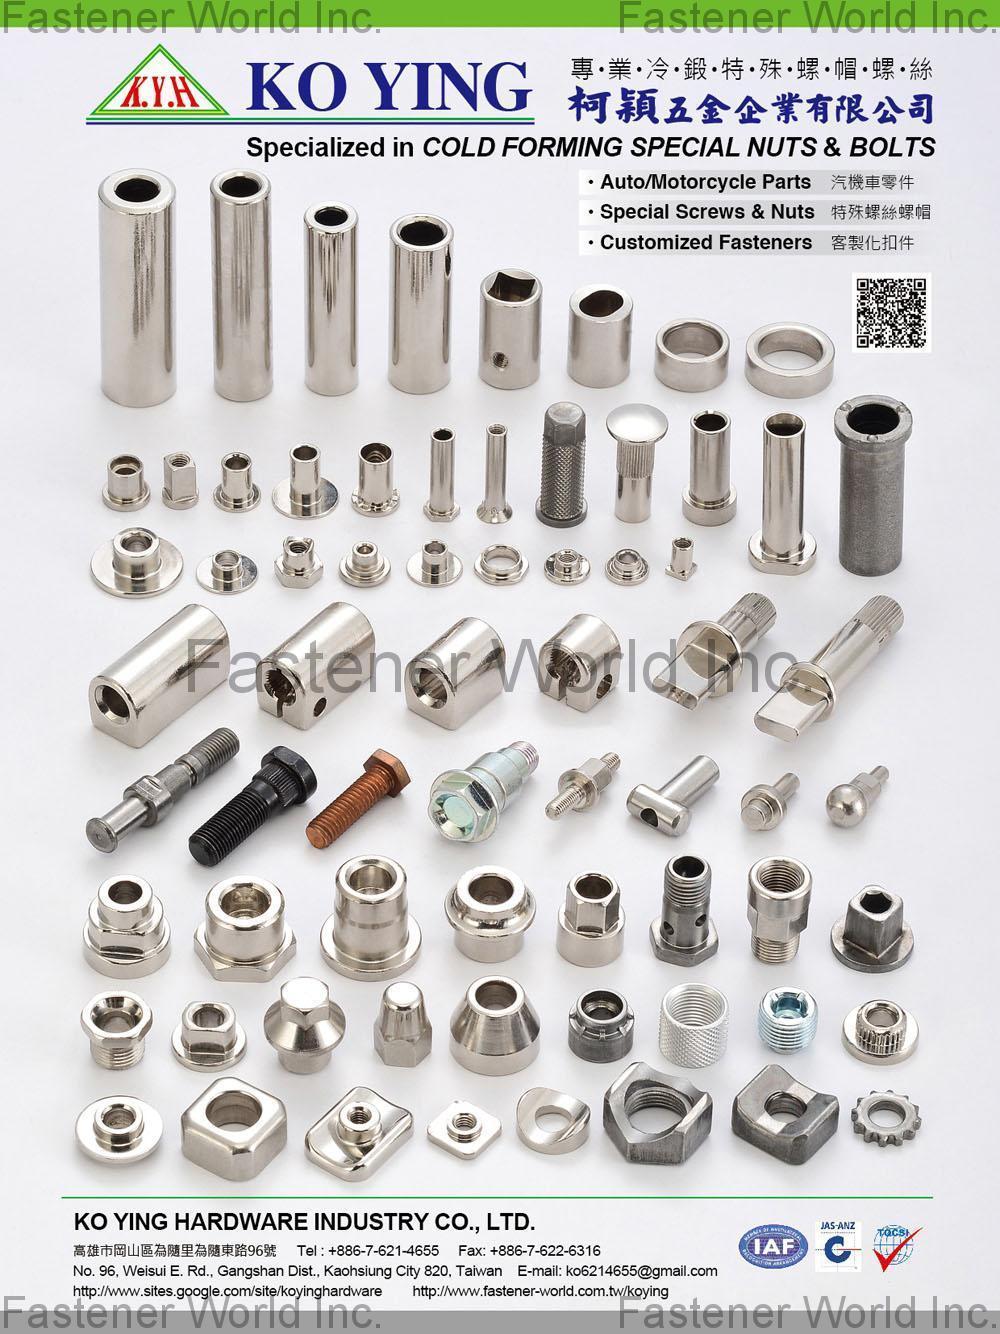 KO YING HARDWARE INDUSTRY CO., LTD. , Cold Forming Special Nuts & Bolts, Automotive & Motorcycle Special Screws / Bolts, Customized Fasteners, Round Nuts, tubes, Furniture Fasteners , Automotive Parts